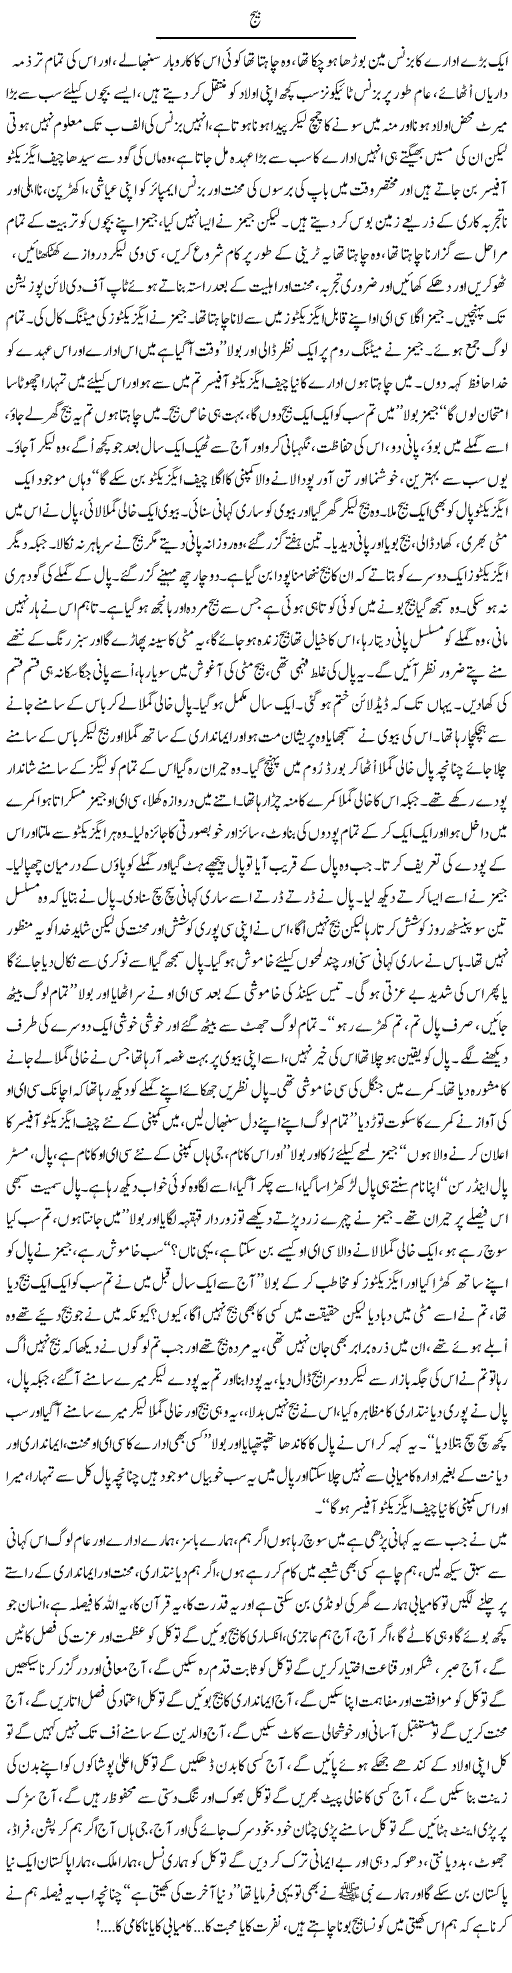 Seeds Express Column Amad Chaudhry 16 January 2011